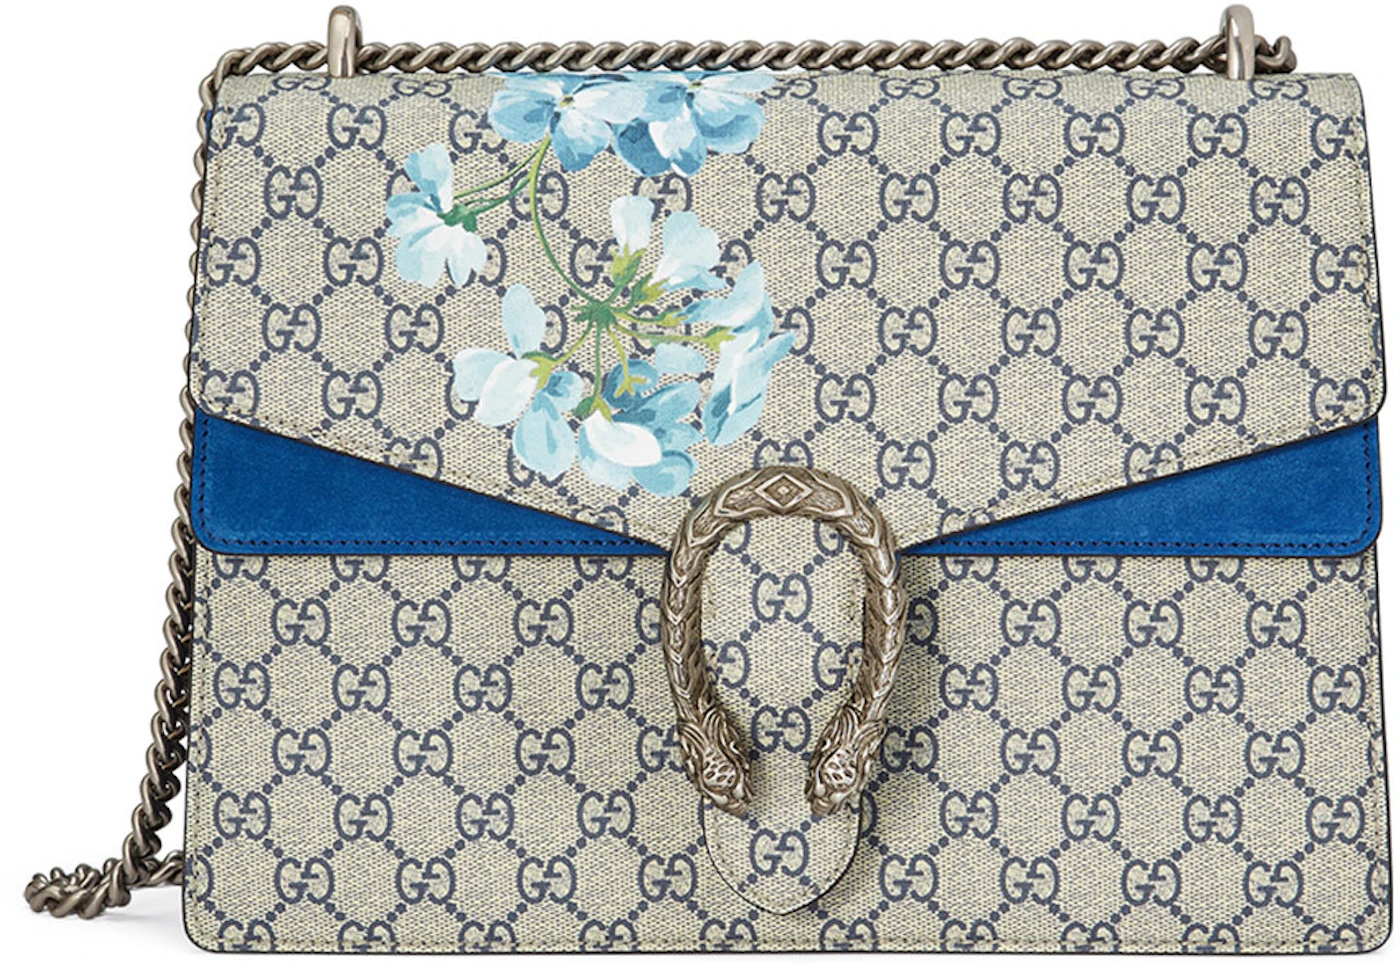 Gucci Gucci GG Blooms Supreme Canvas Shoulder Bag available at #Nordstrom